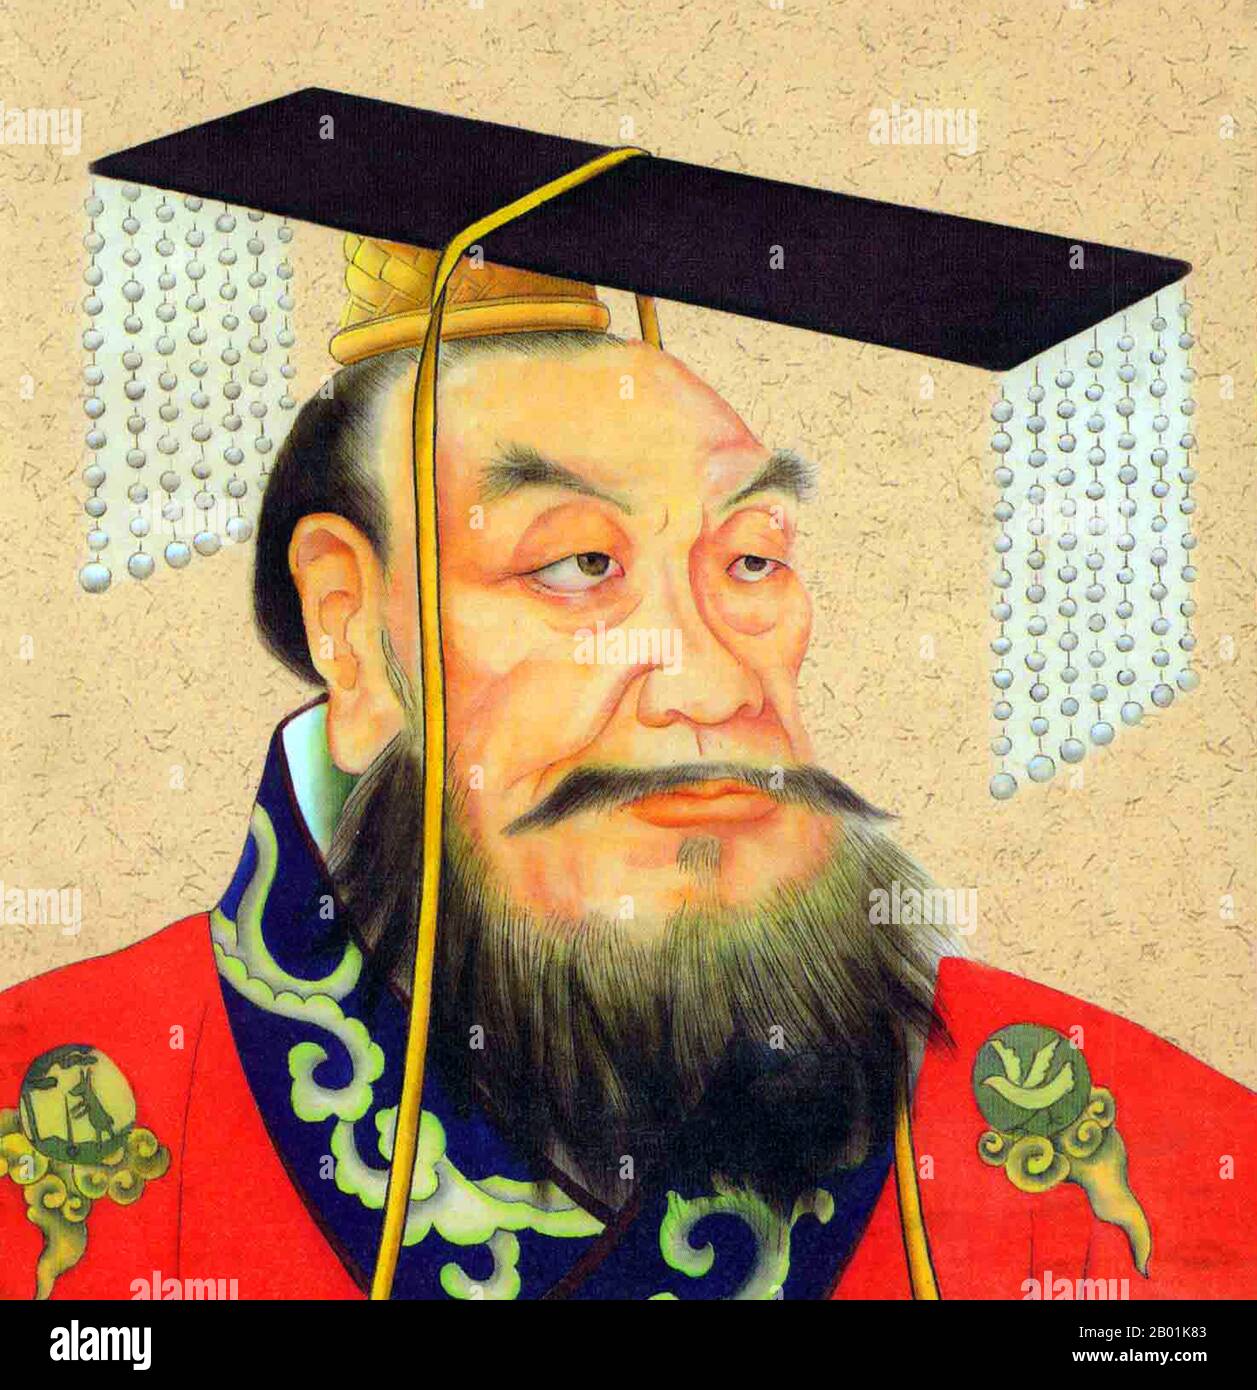 China: Qin Shu Huang/Qin Shi Huangdi (259-210 BCE), First Emperor of a unified China. Hanging scroll portrait, c. 19th century.  Qin Shi Huang, personal name Ying Zheng, was king of the Chinese State of Qin from 246 to 221 BCE during the Warring States Period. He became the first emperor of a unified China in 221 BCE, and ruled until his death in 210 BC at the age of 49. Styling himself 'First Emperor' after China's unification, Qin Shi Huang is a pivotal figure in Chinese history, ushering in nearly two millennia of imperial rule. Stock Photo